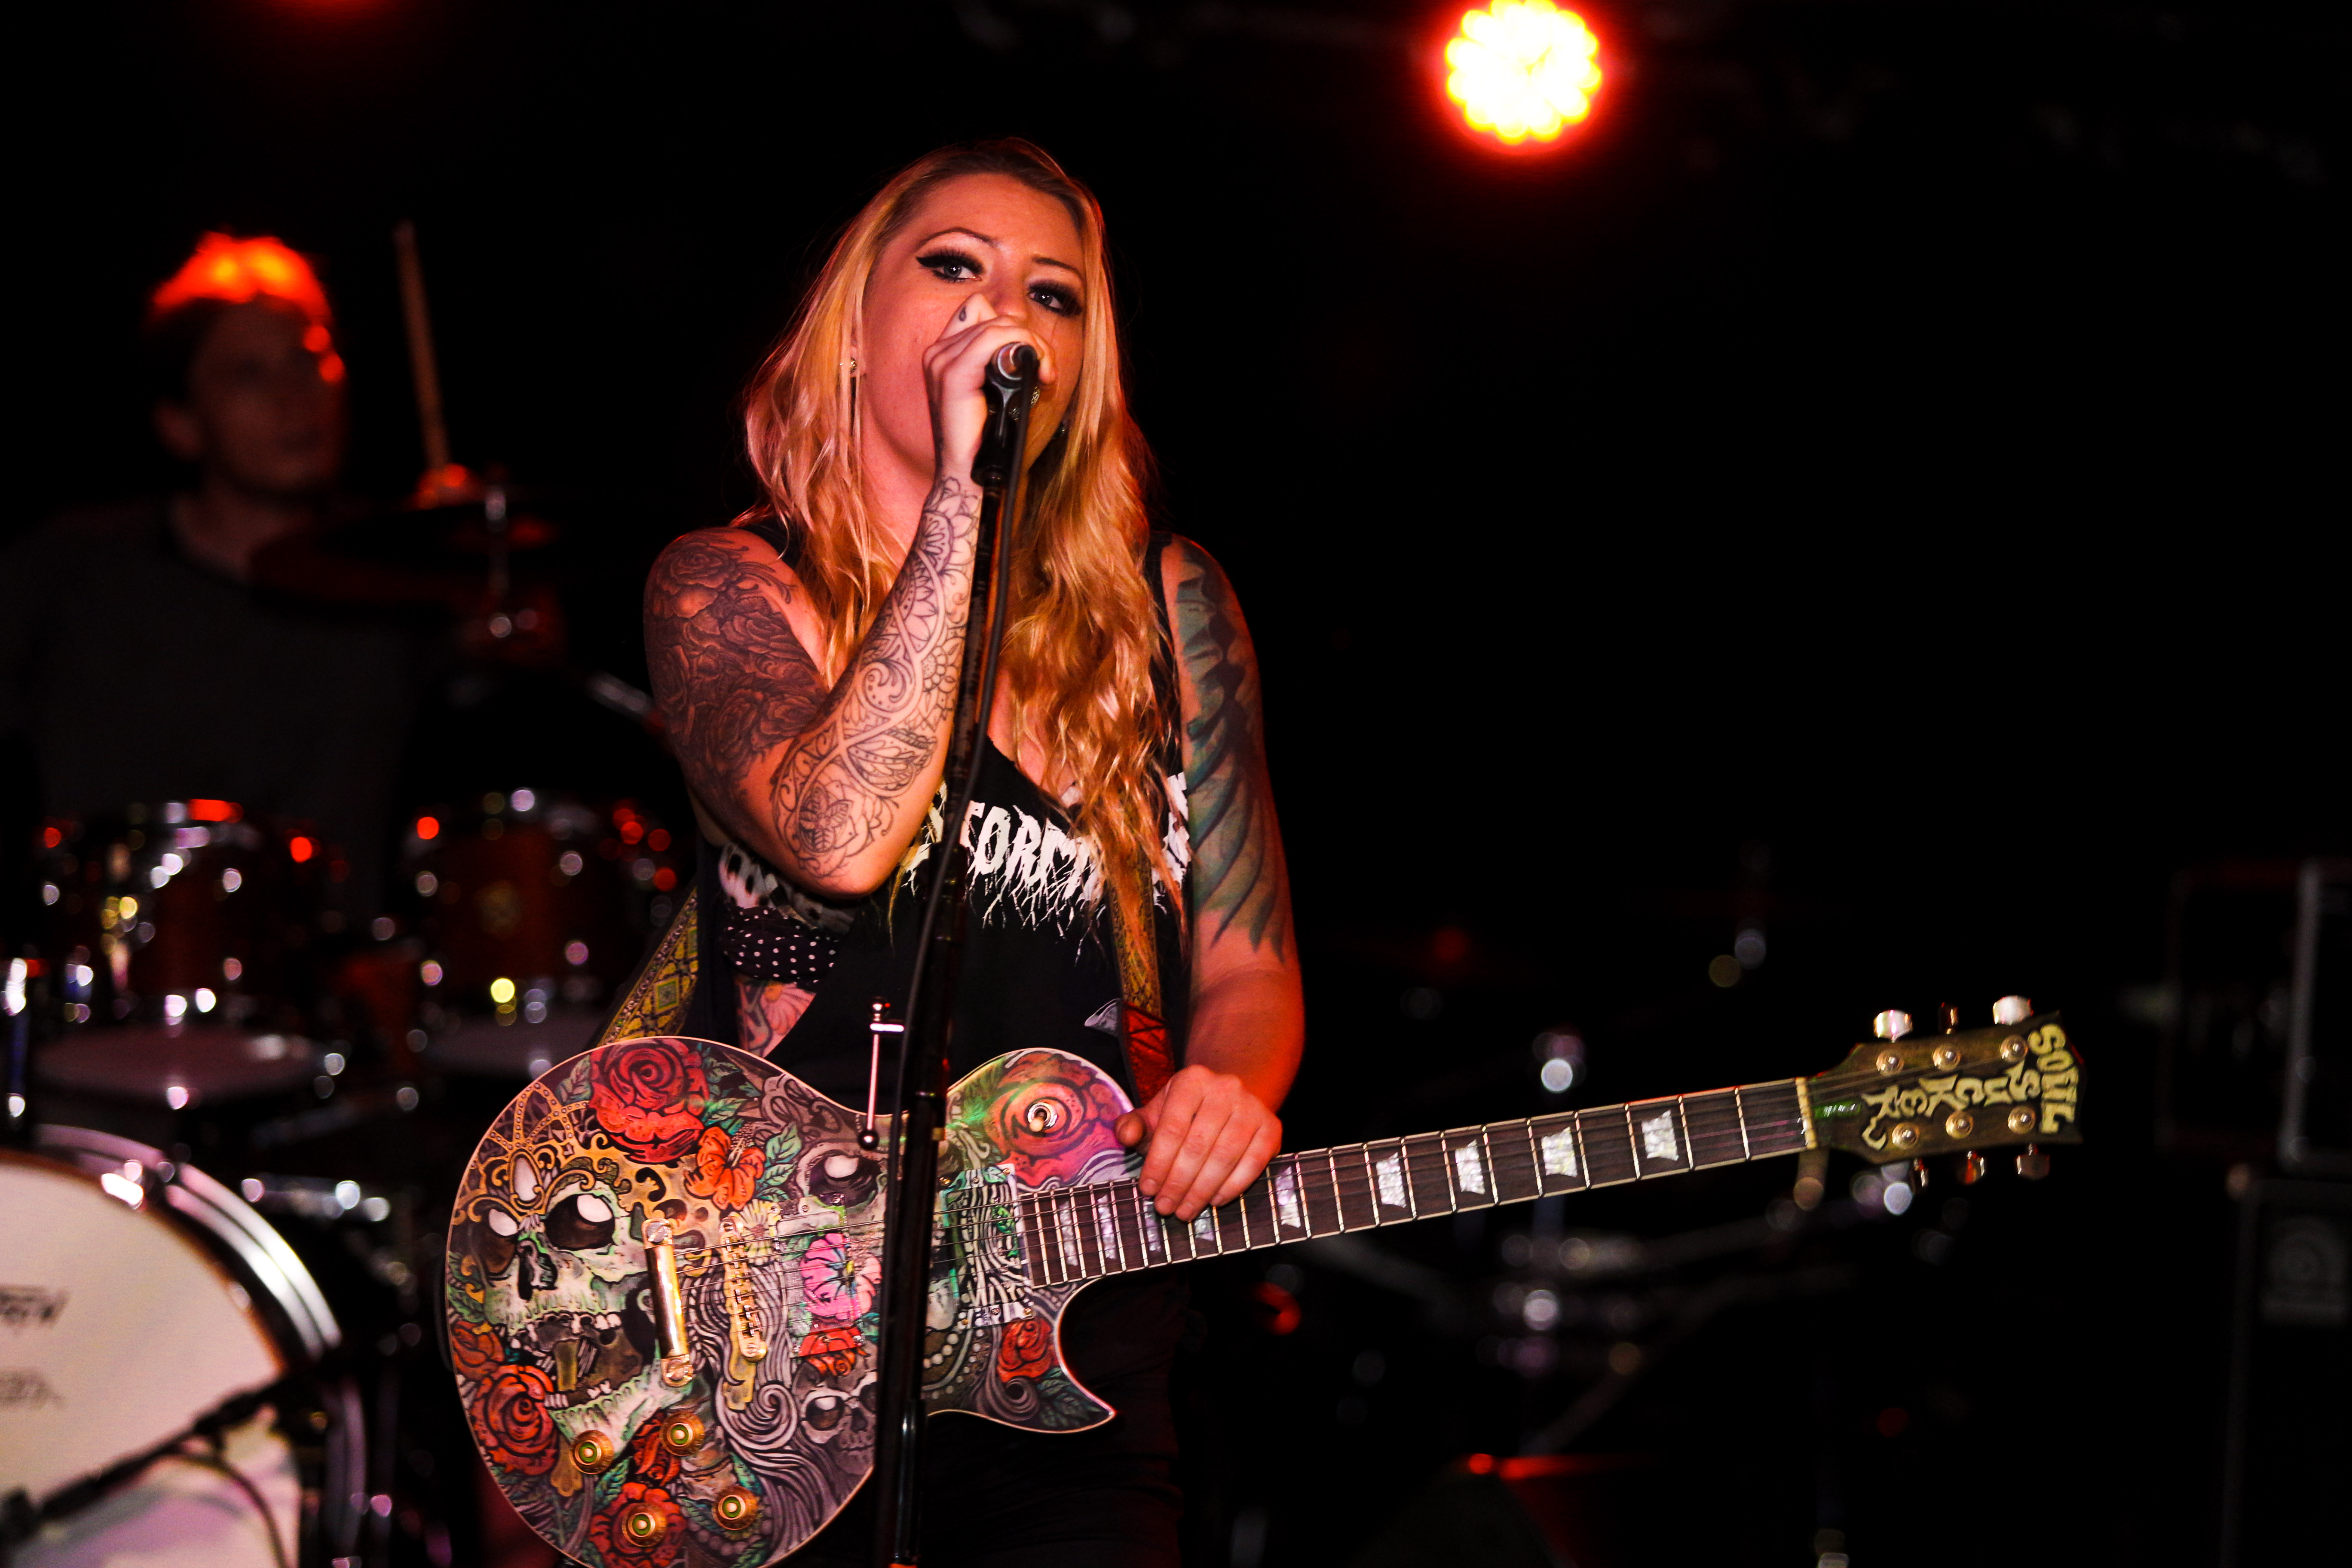 Female singer of Drozer singing with a beautiful guitar. The guitar is shiny with roses and skulls interlaced.